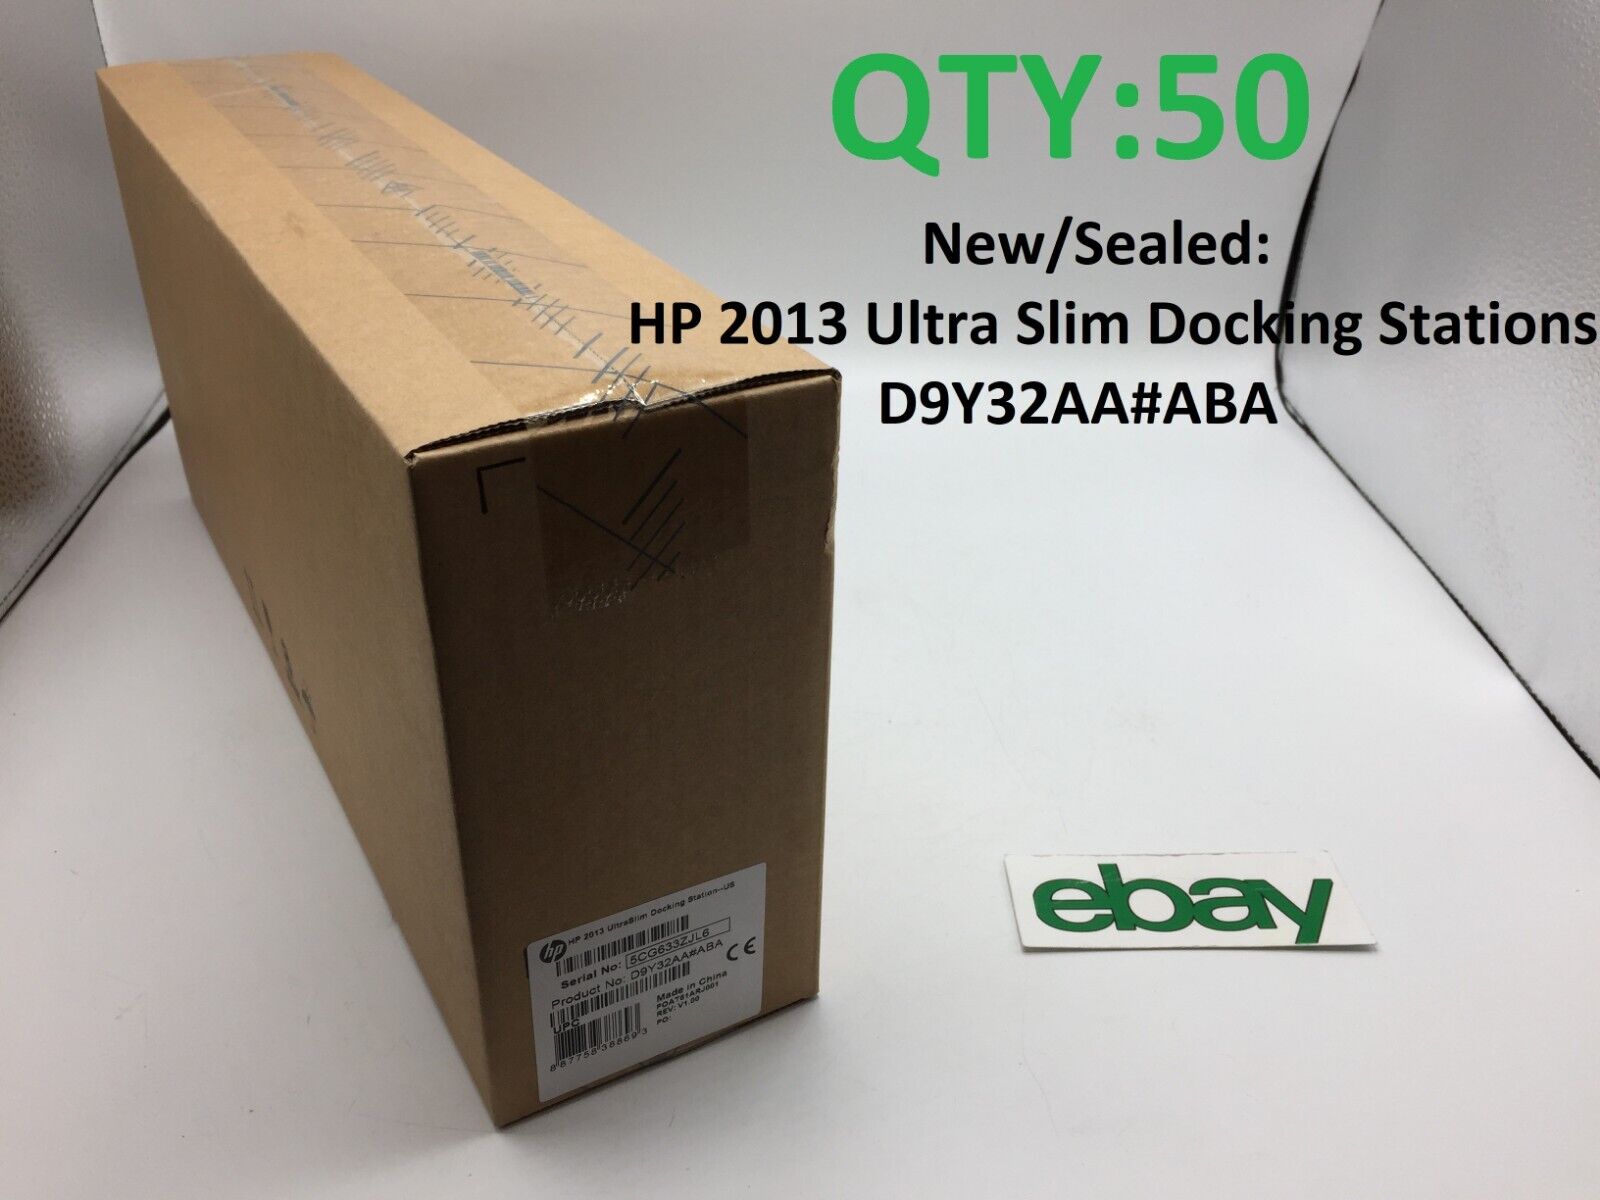 LOT OF 50 NEW Sealed HP 2013 Ultra Slim Docking Station D9Y32AA#ABA ~ FREE S/H